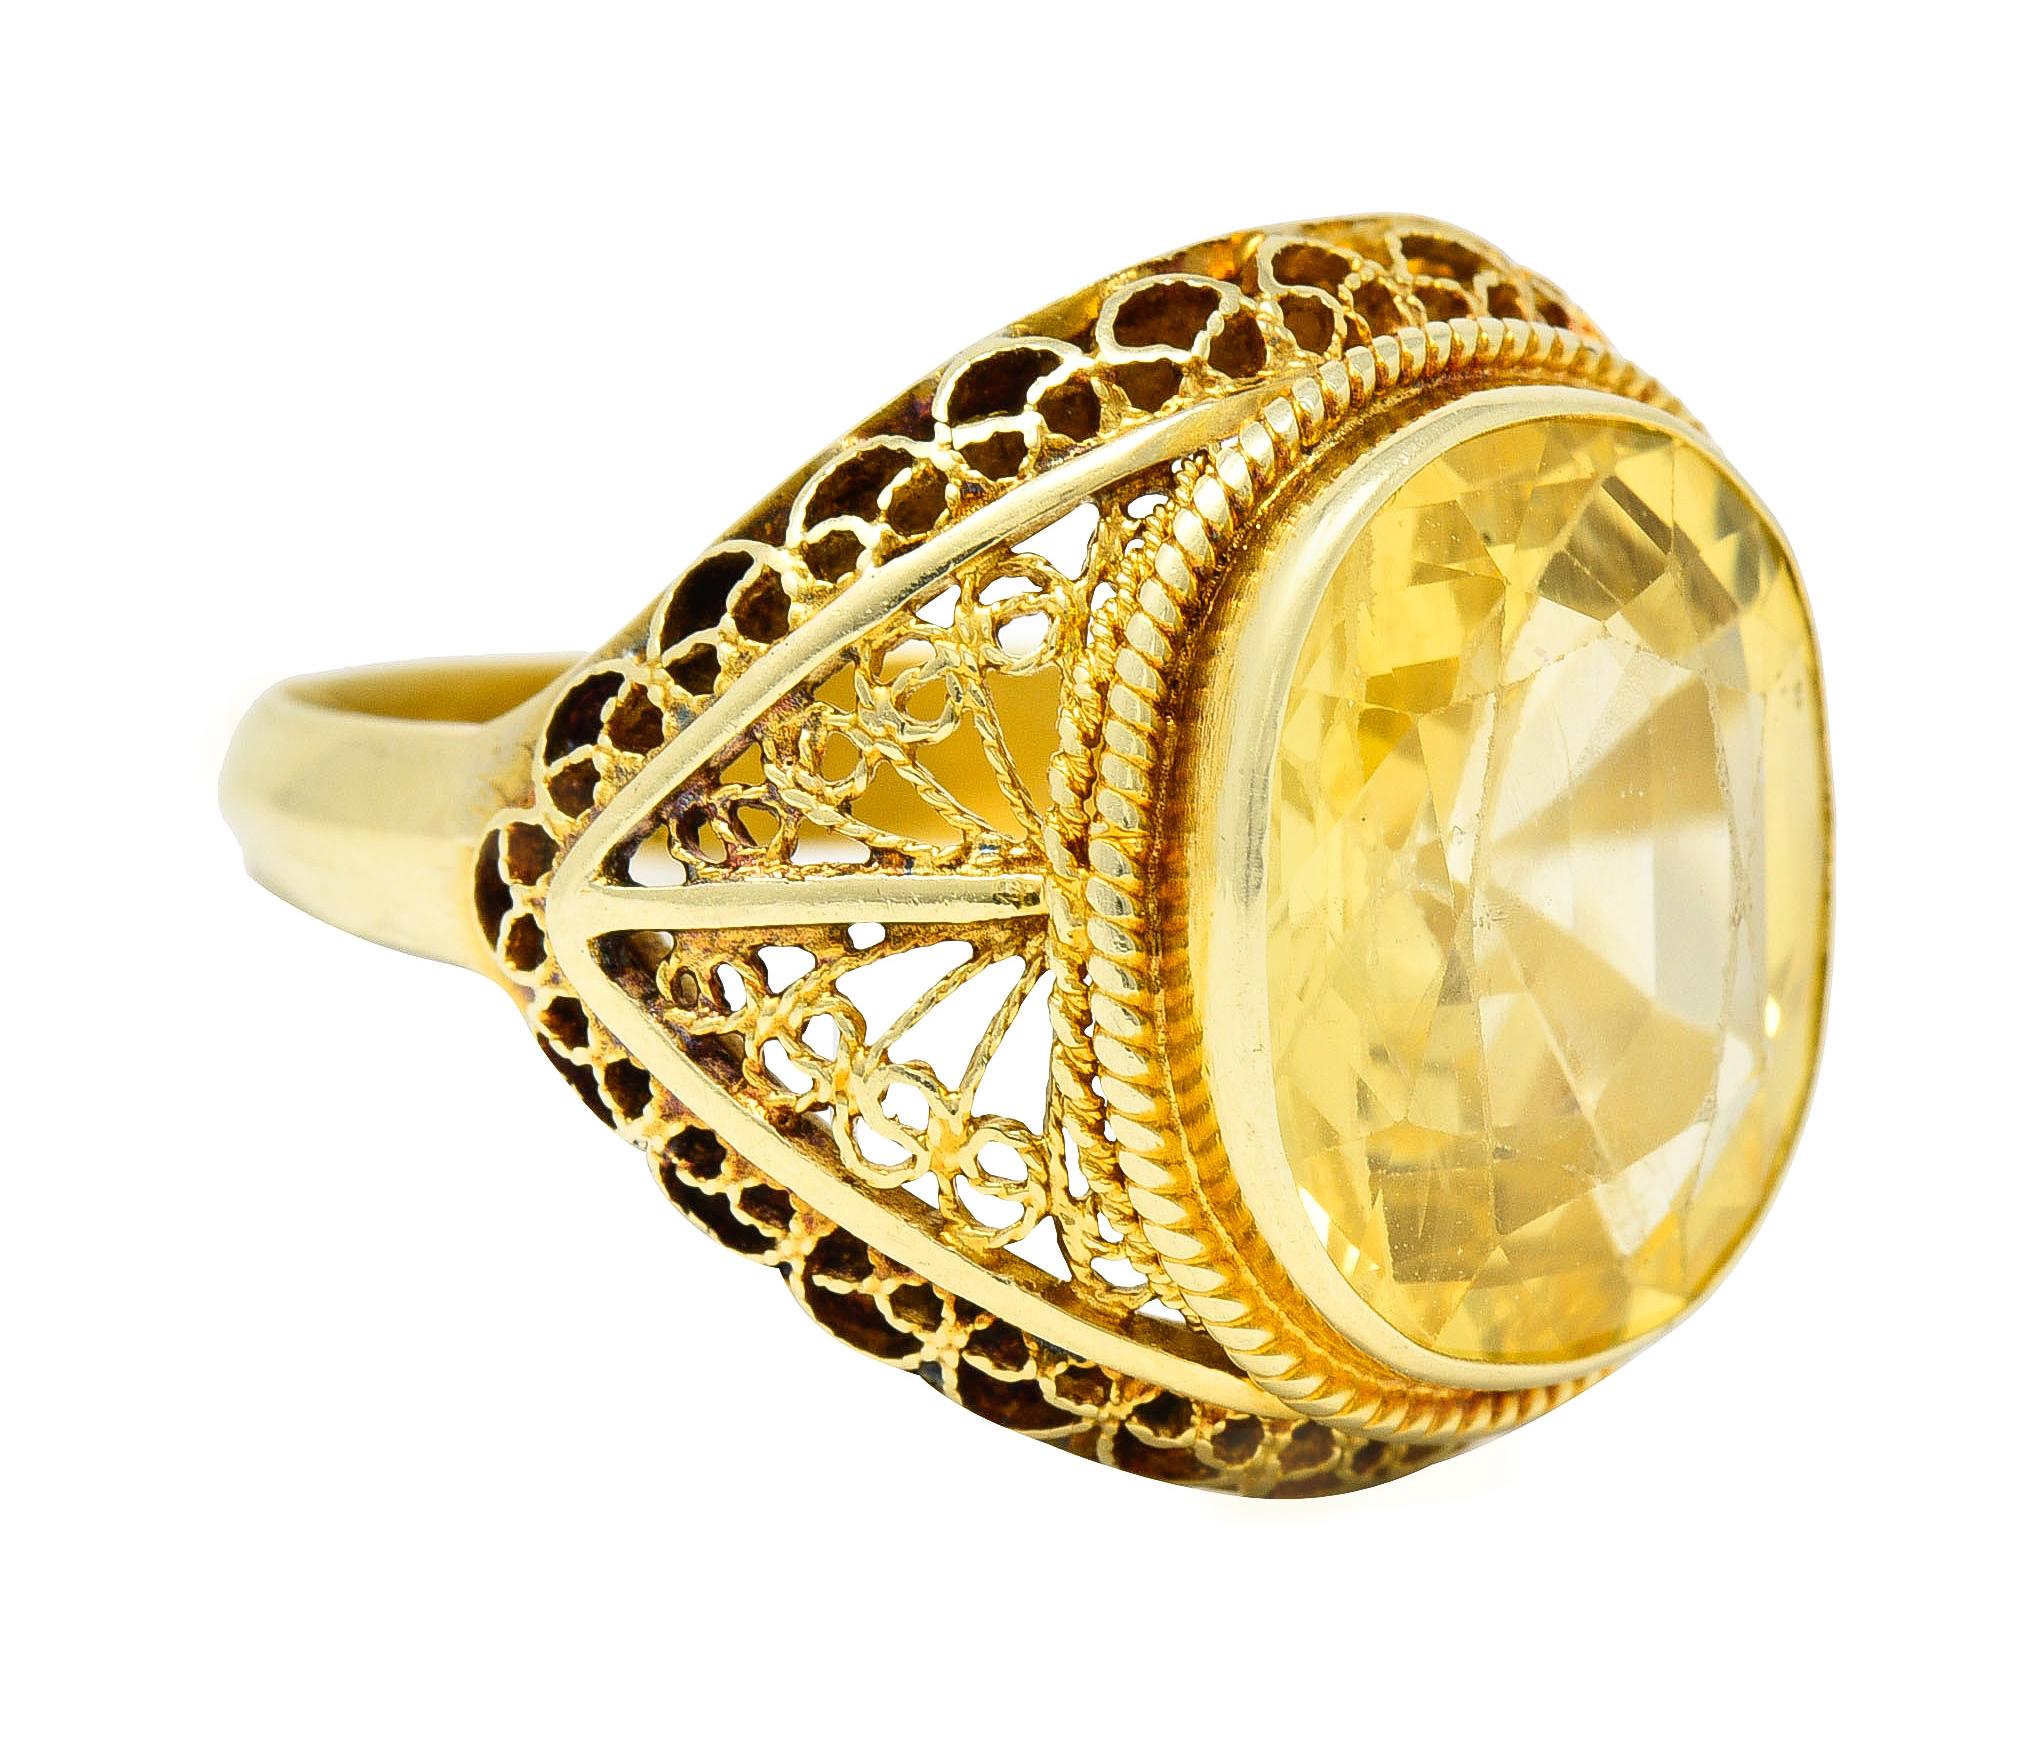 Centering a cushion cut sapphire weighing approximately 9.05 carats
Transparent medium yellow in color - bezel set
Accented by a twisted wire surround
Featuring a scrolling filigree bombay shaped gallery
With a pierced whiplash motif profile
Stamped